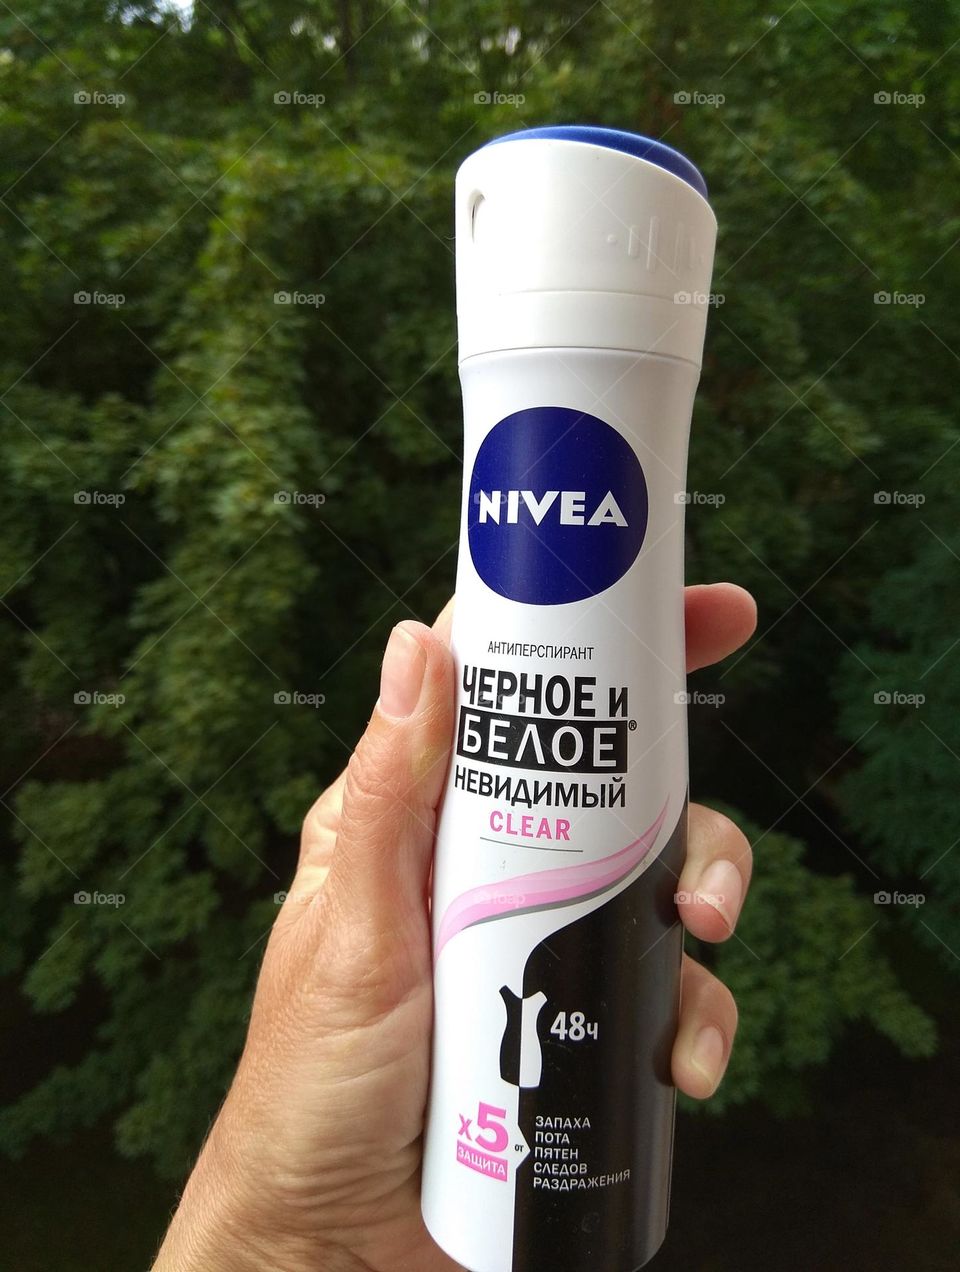 Nivea deodorant spray in the female hand green summer background, love products